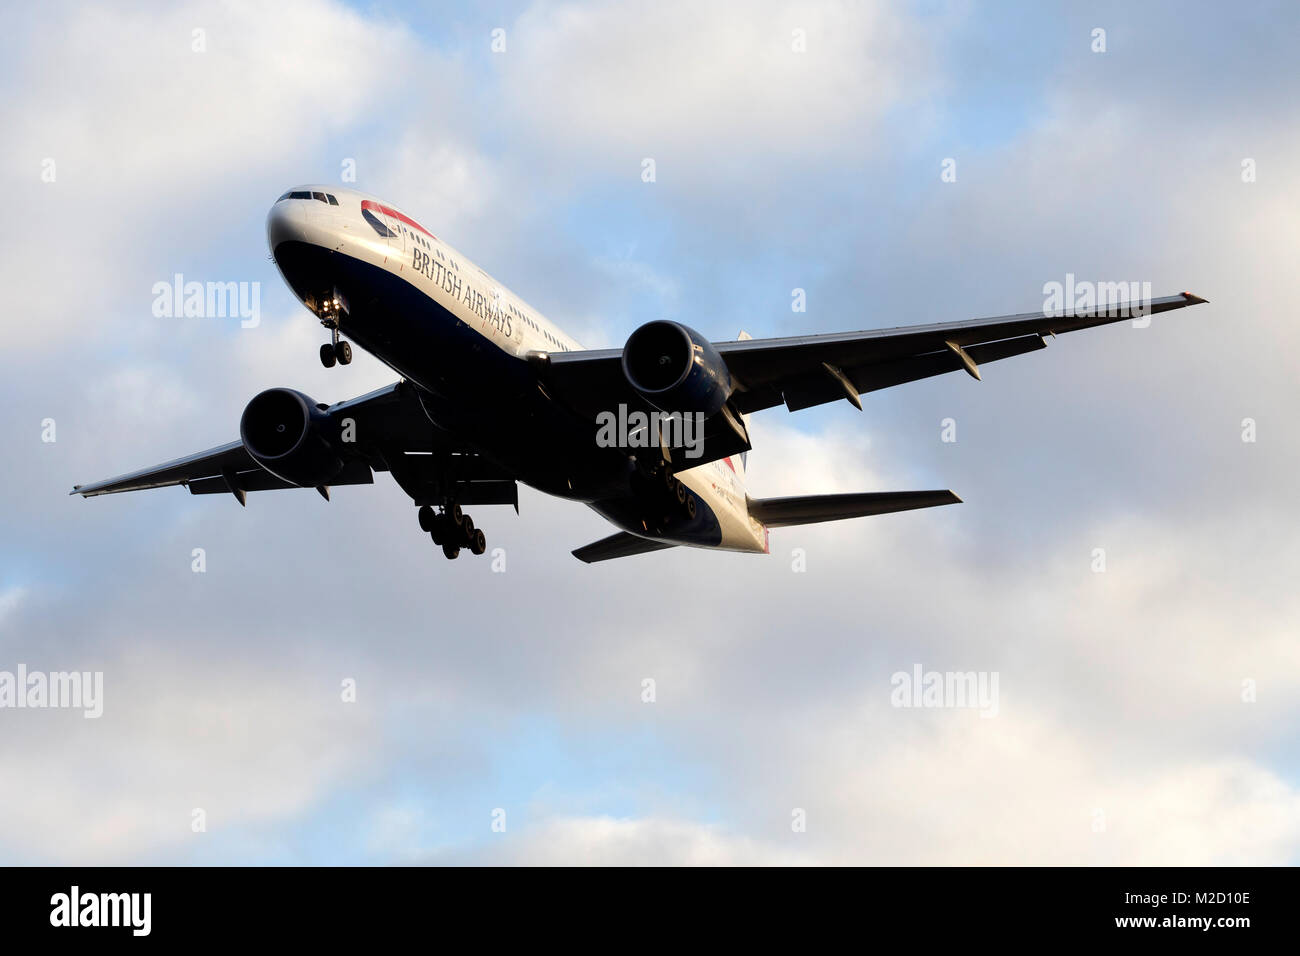 A British Airways Boeing 777 aircraft on final approach to London Gatwick airport on a January morning Stock Photo